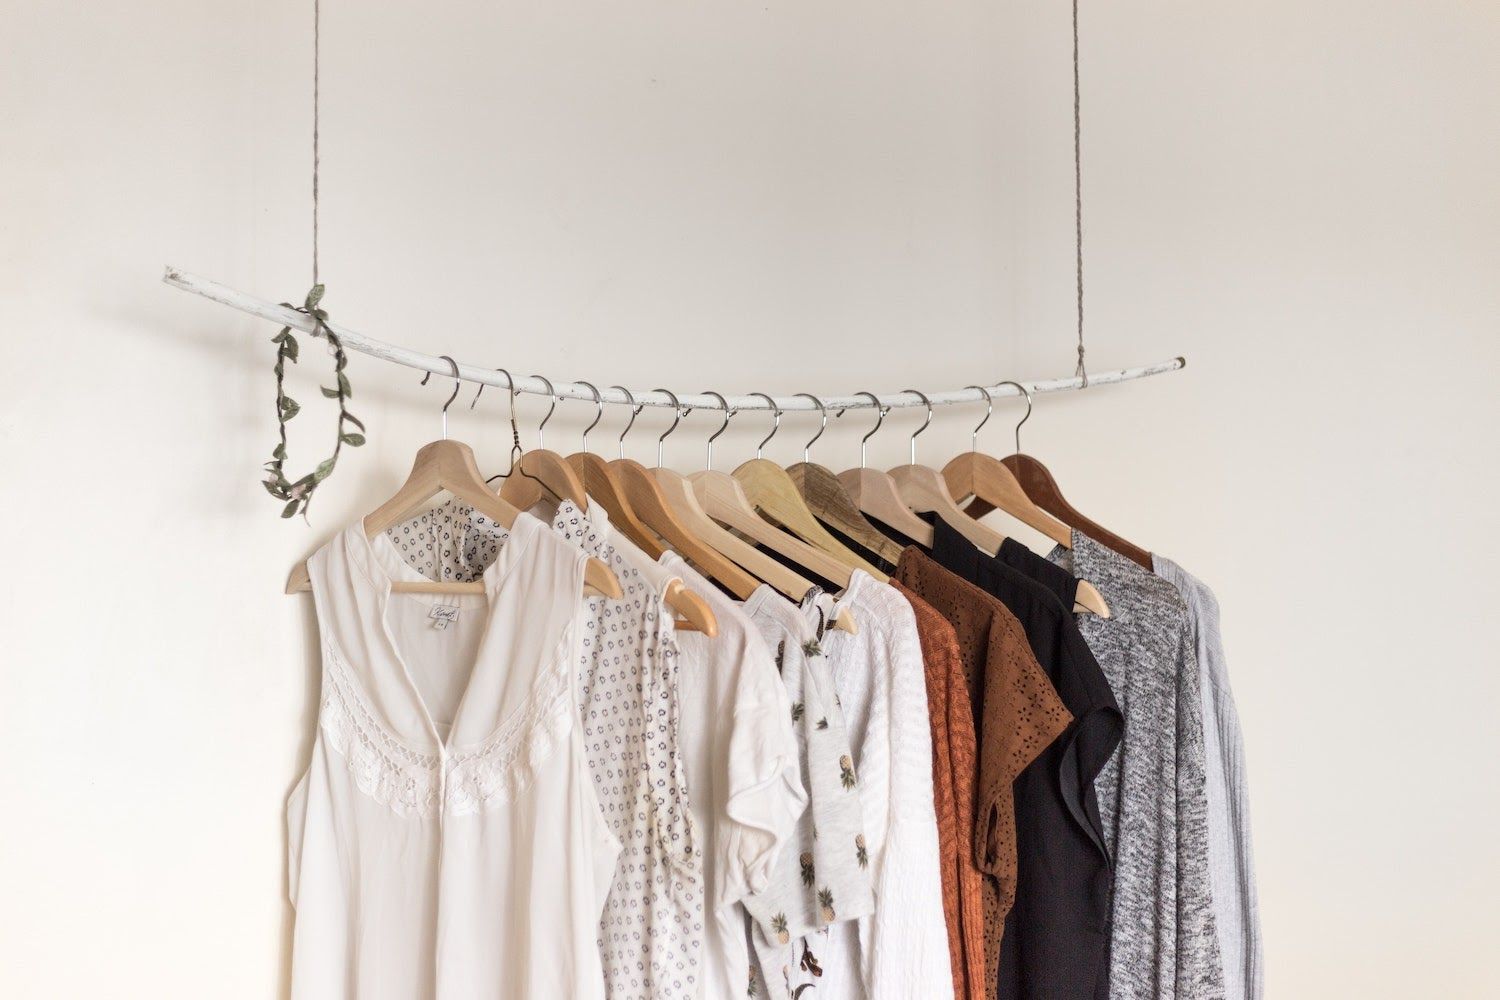 How to Make a Clothing Website: Startup Guide for Retailers 